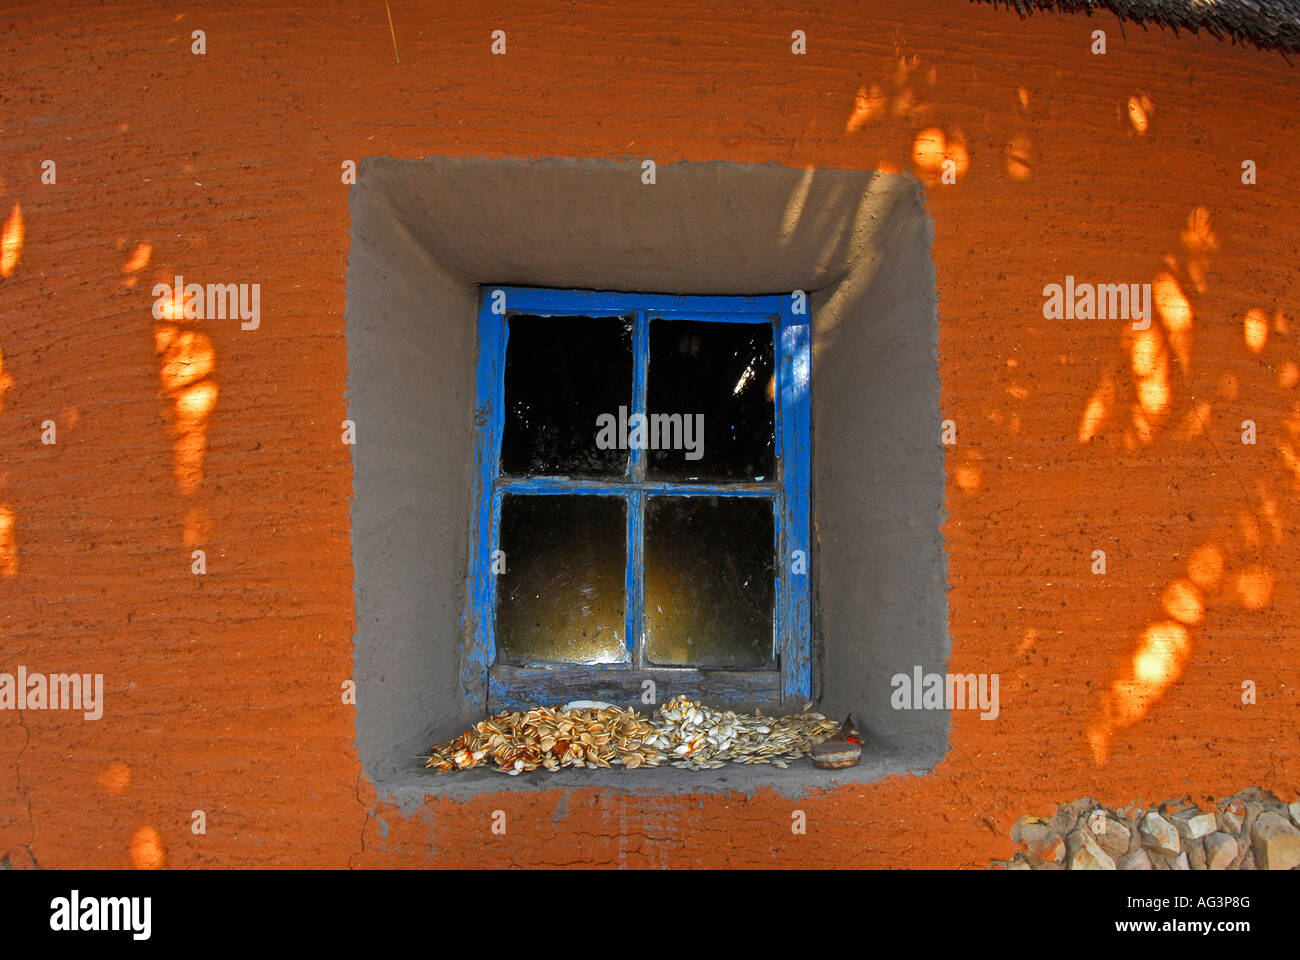 Close-up of bright orange mud wall with bright blue window frame in centre, Lesotho, Africa Stock Photo